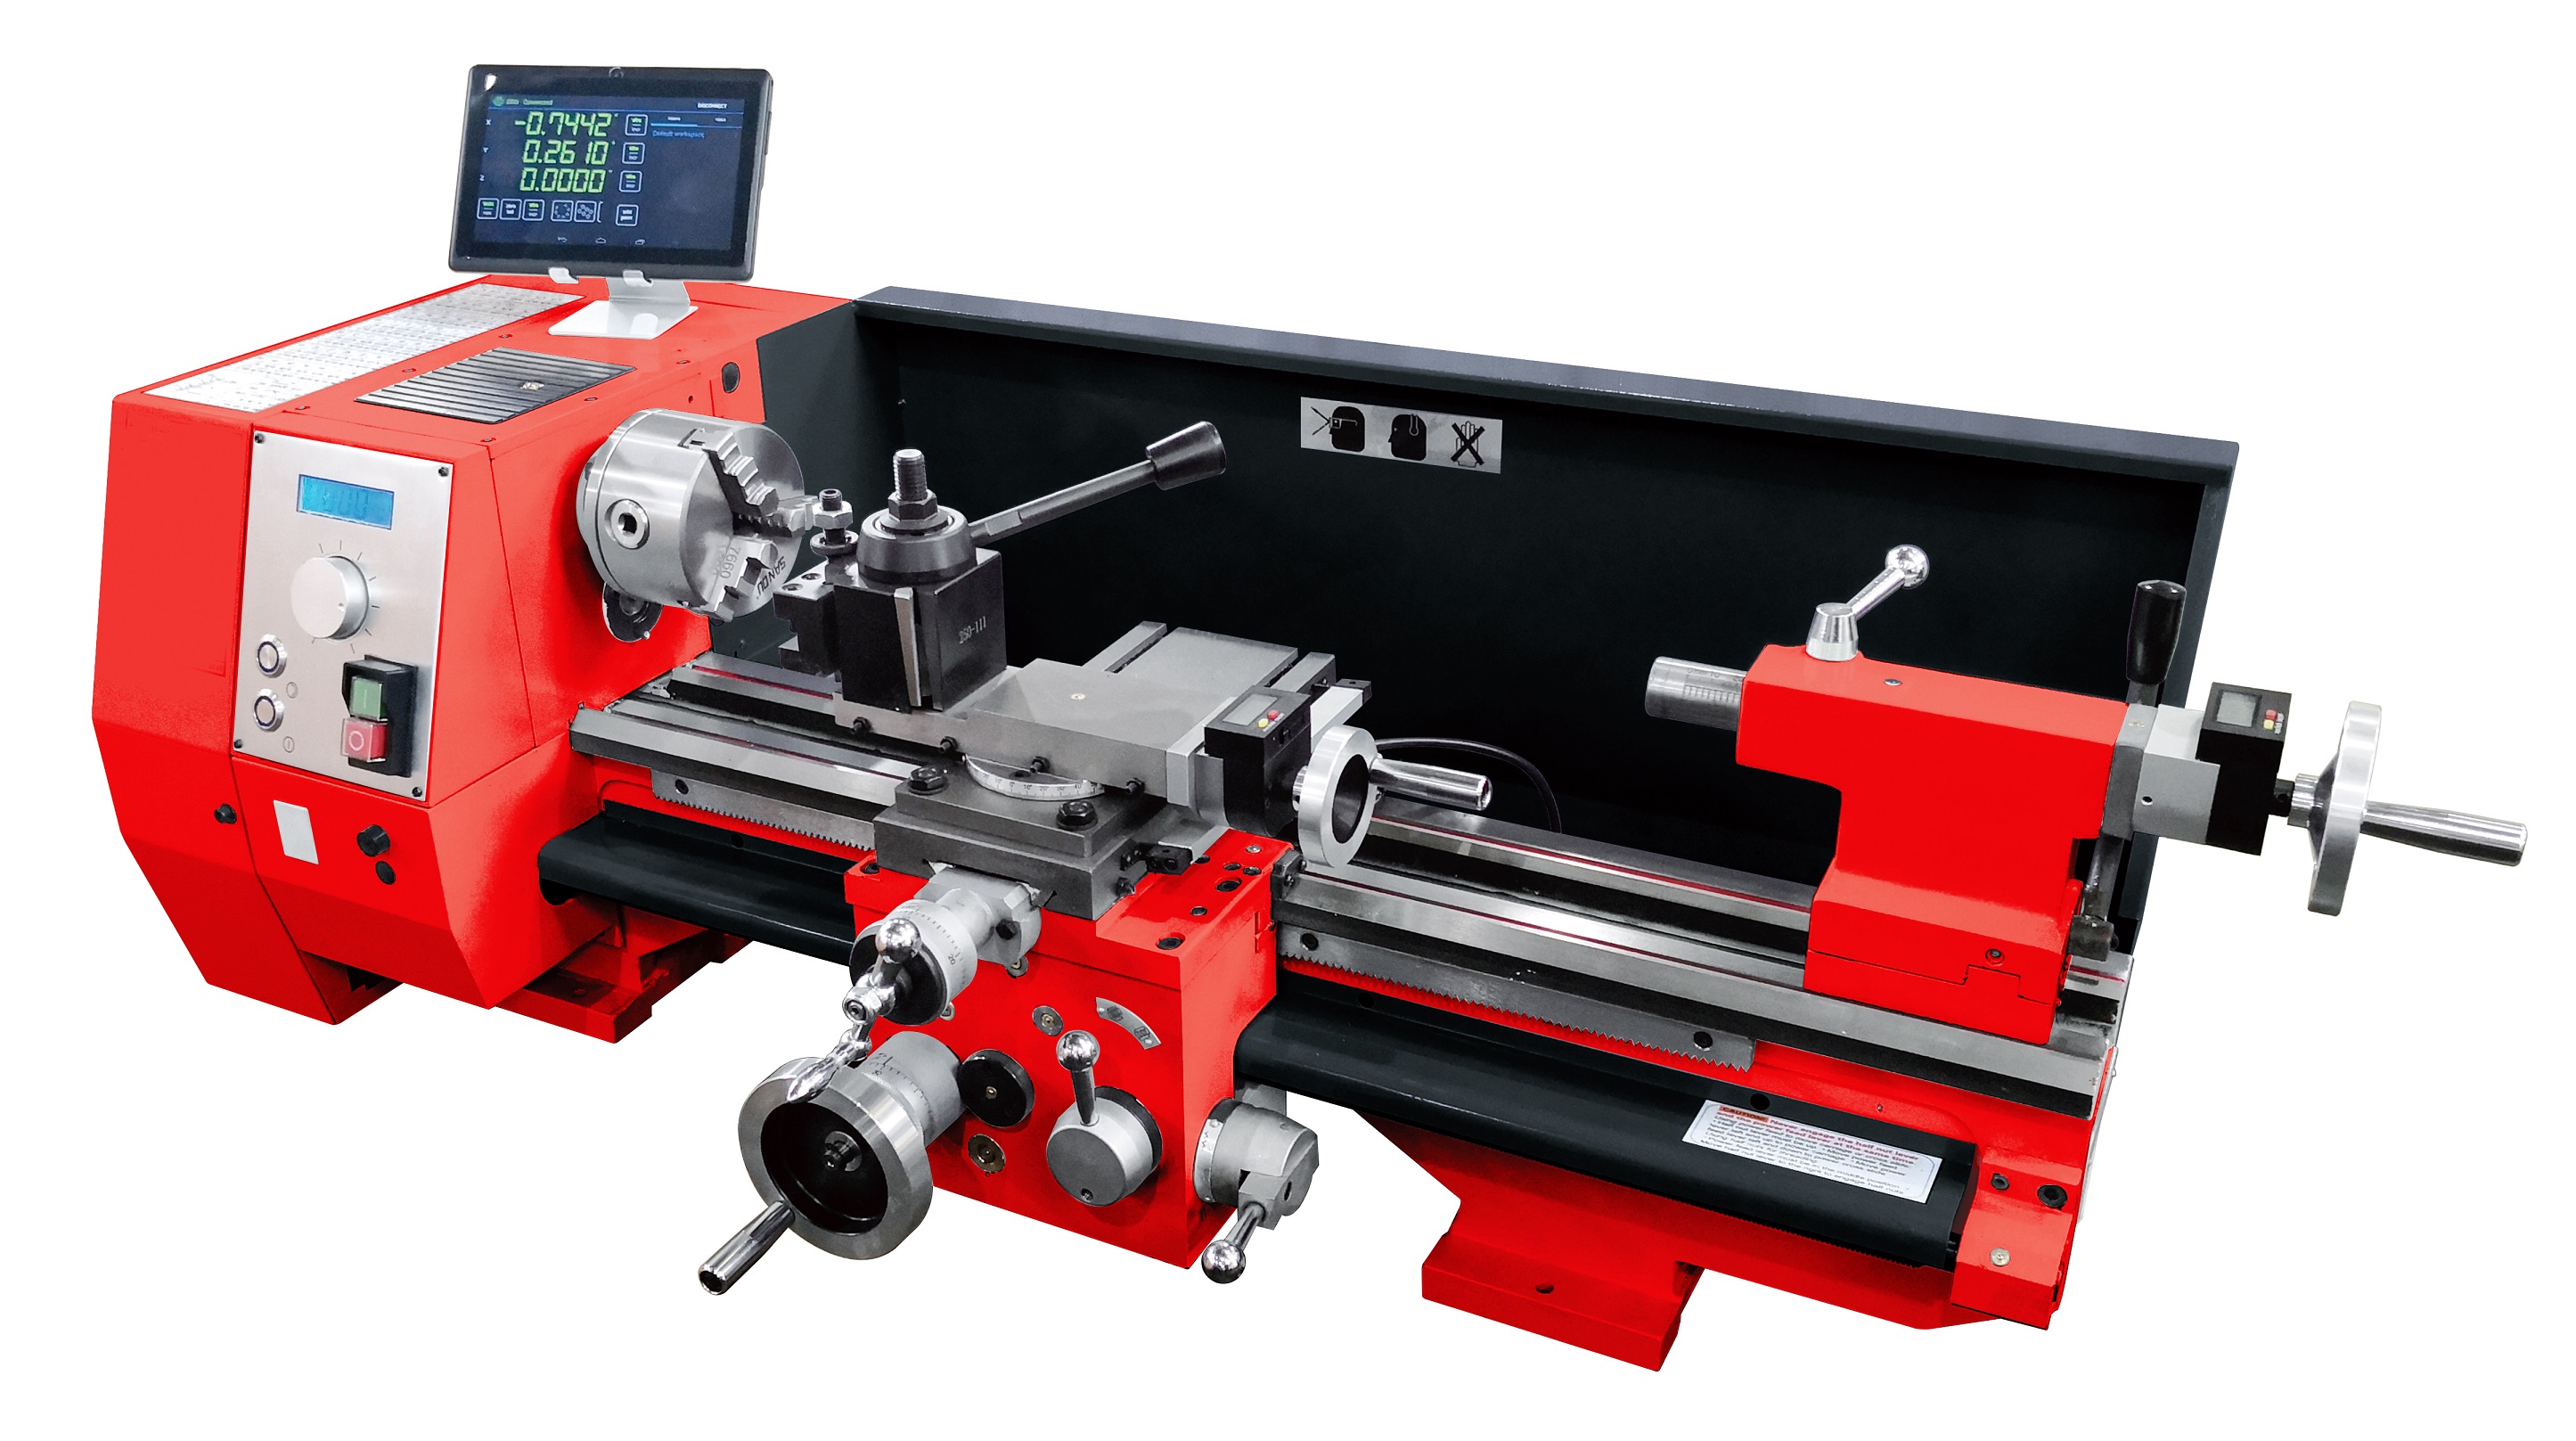 The Ultimate Version of SC4 Lathe